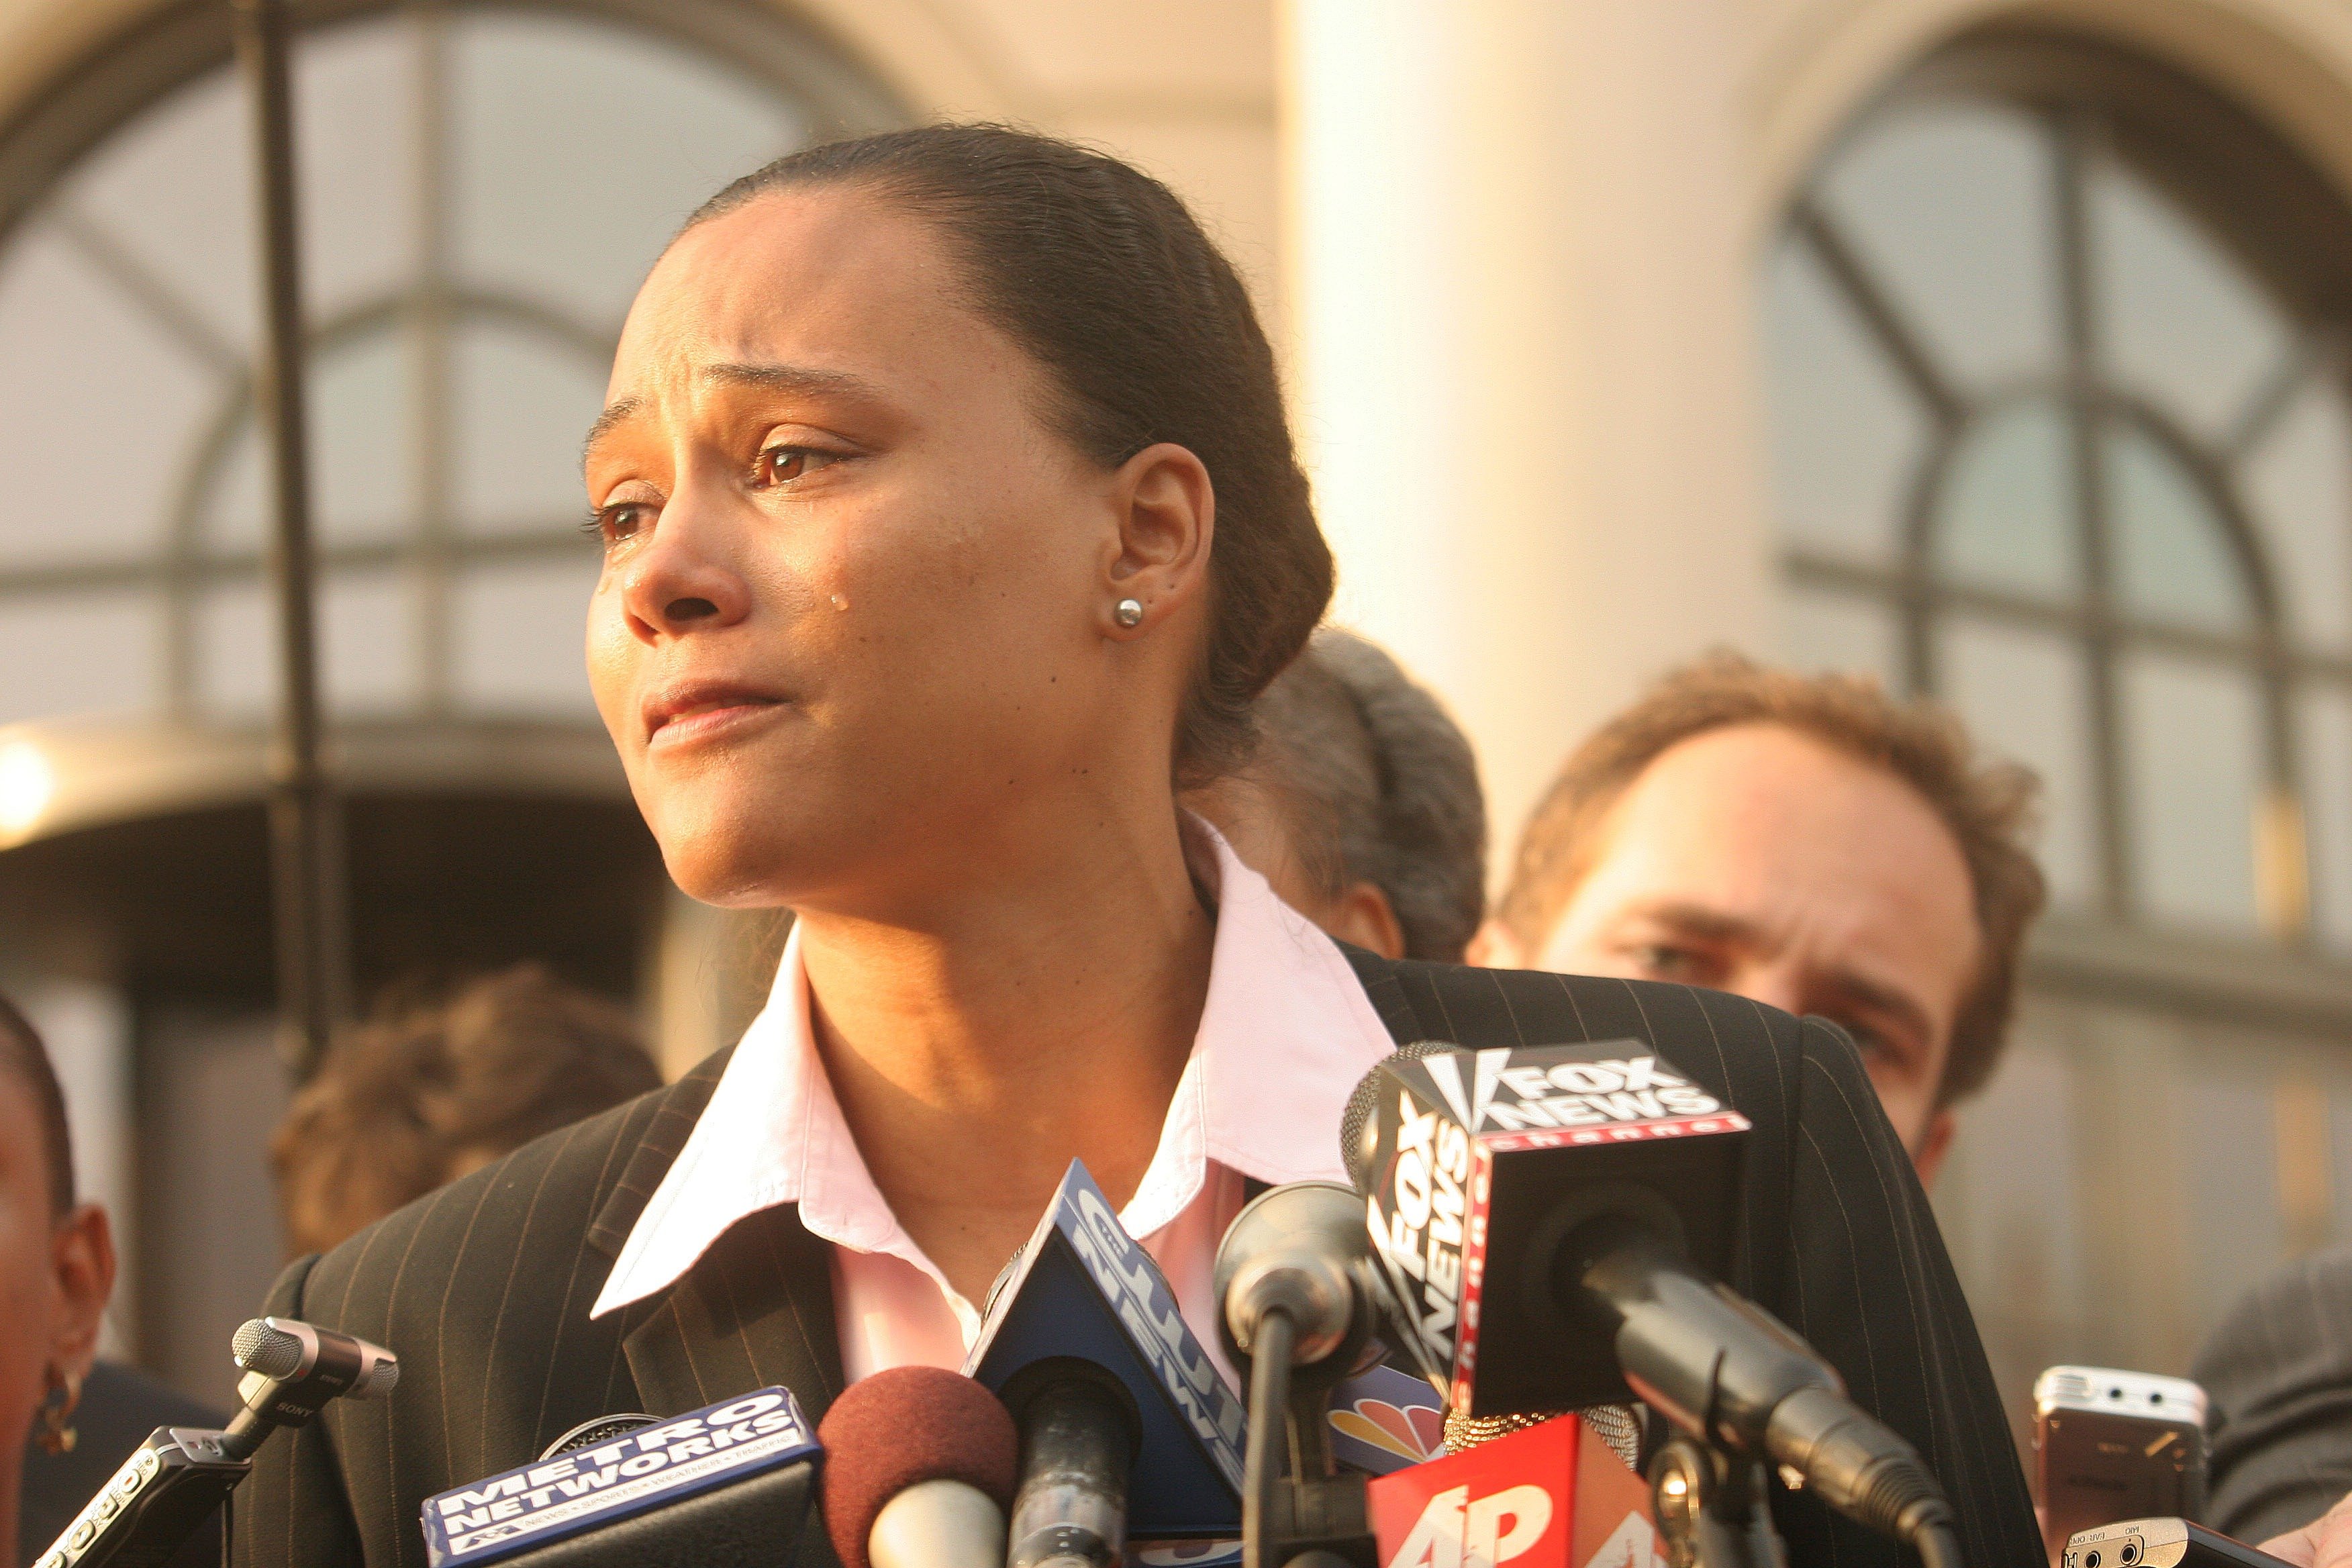 Marion Jones speaks to the media outside a United States federal courthouse October 5, 2007 in White Plains, NY | Photo: Getty Images